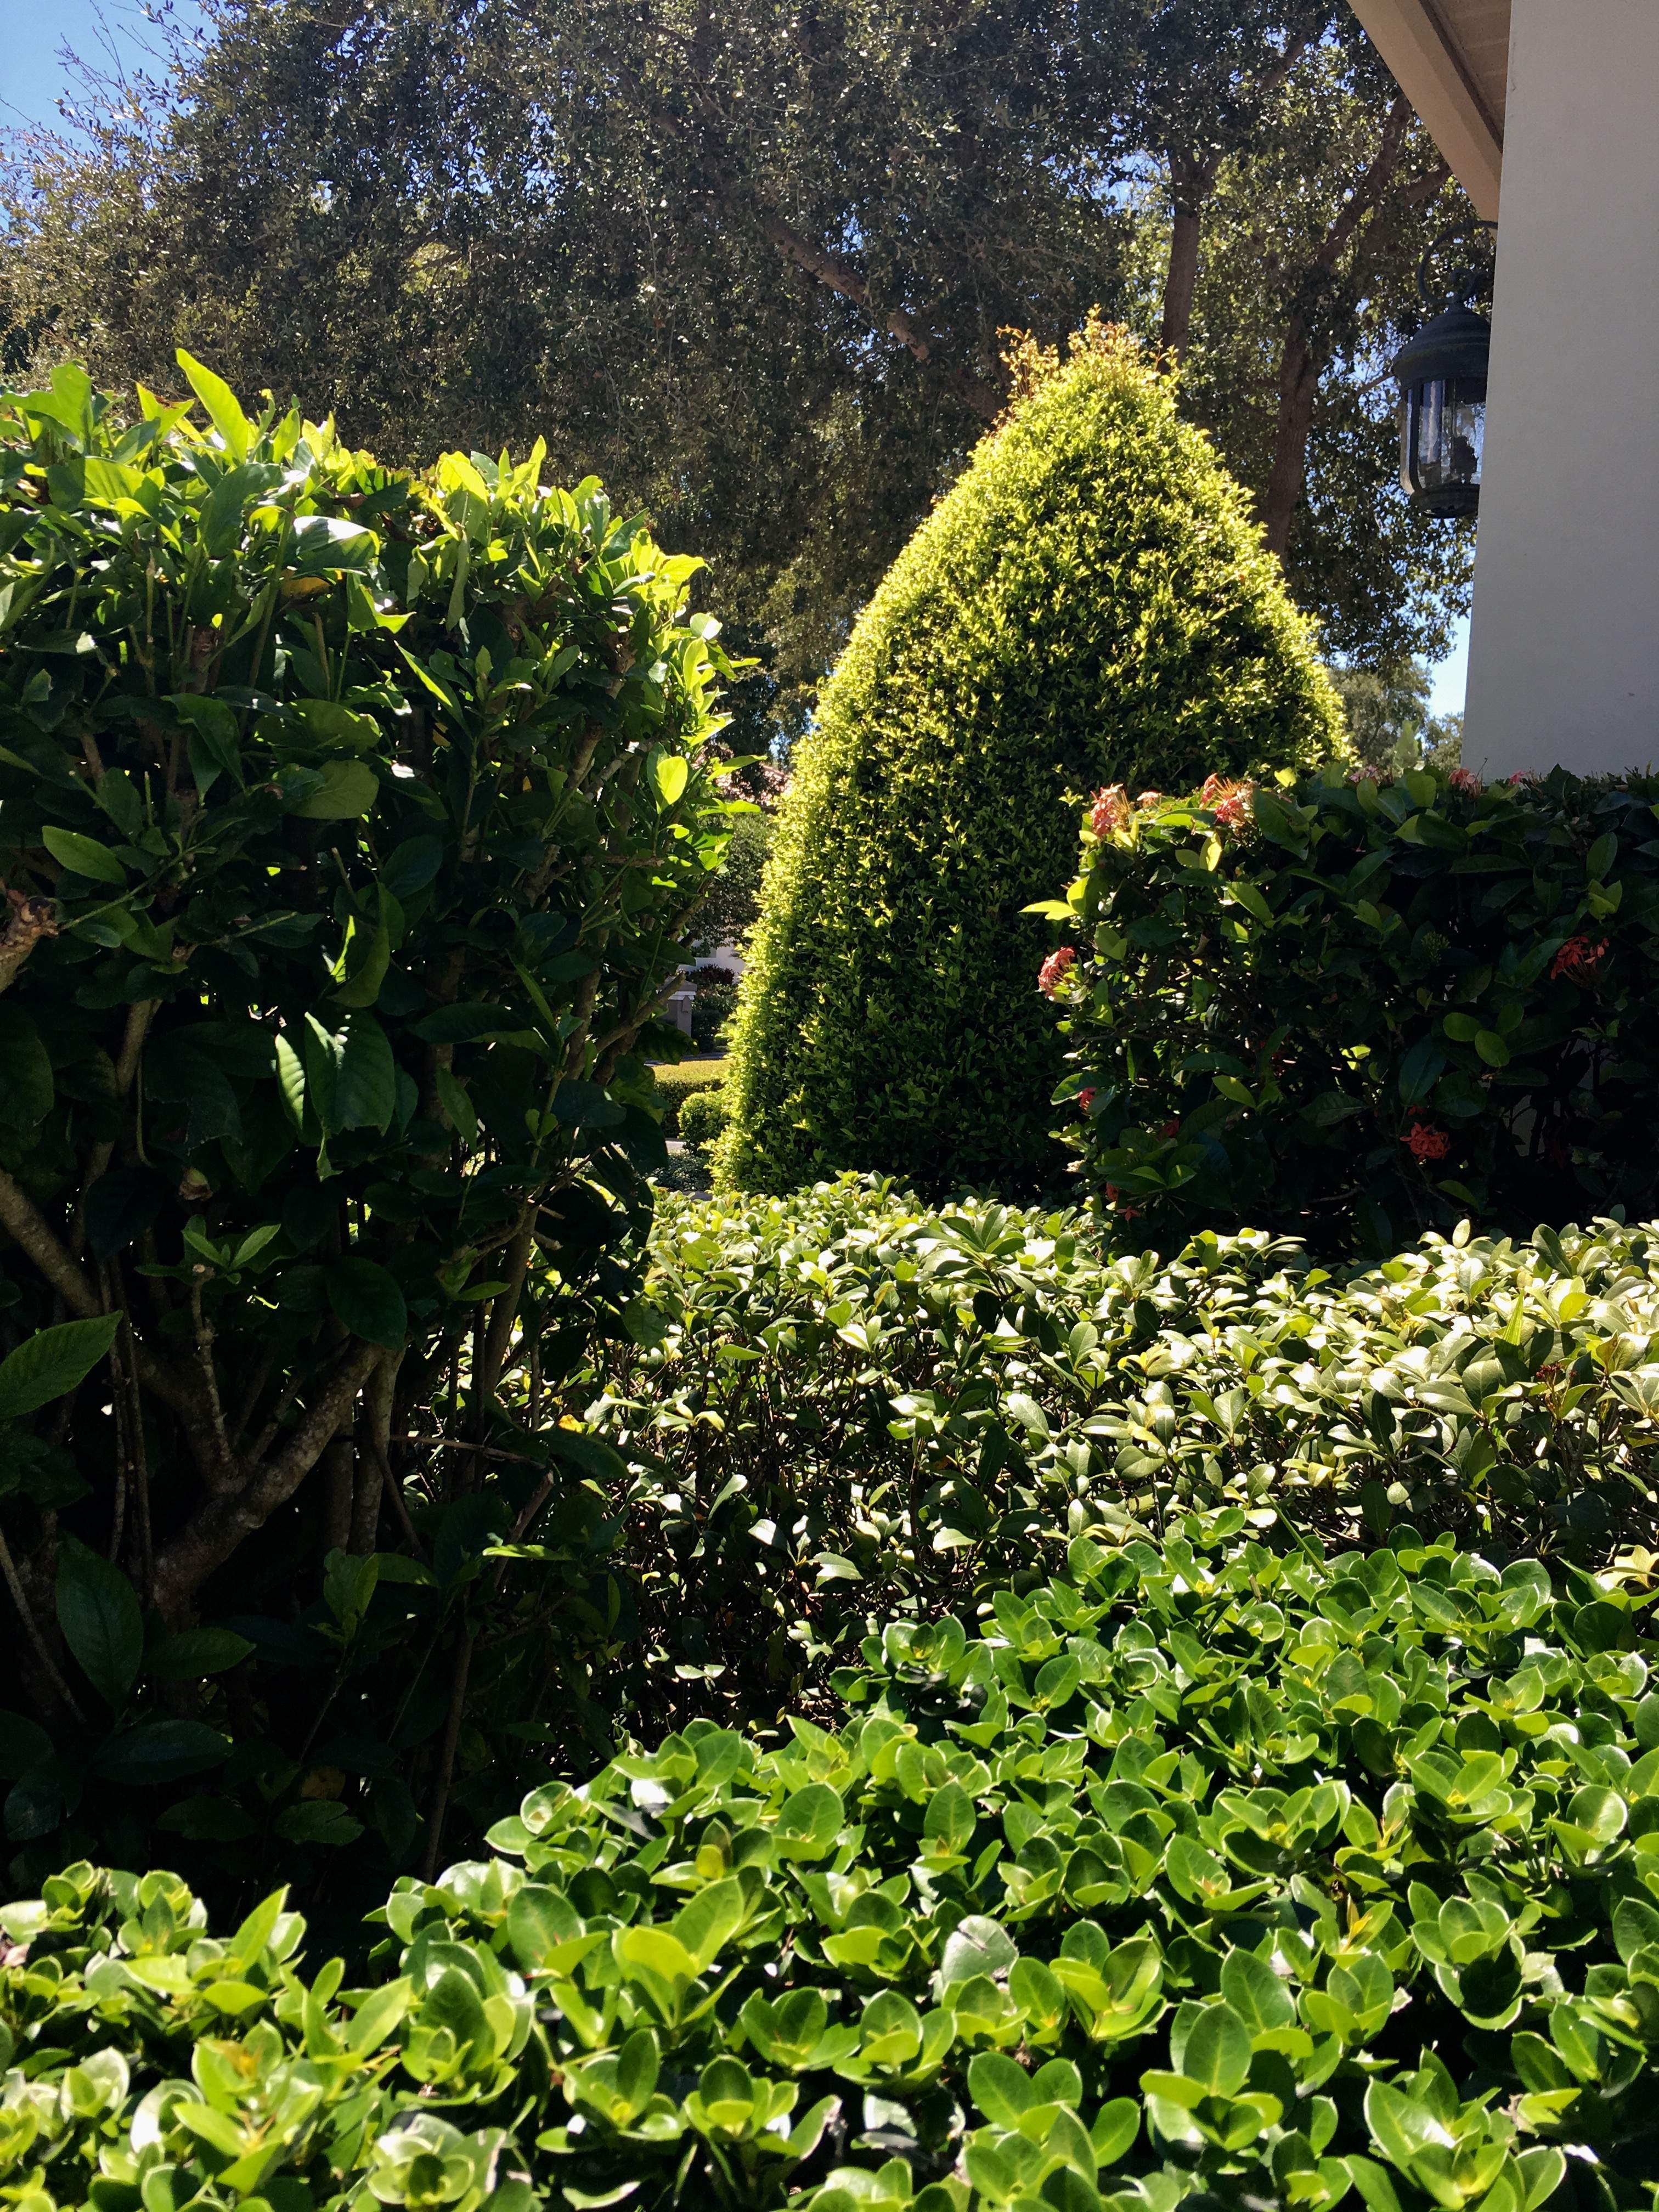 shrubs that need to be manicured